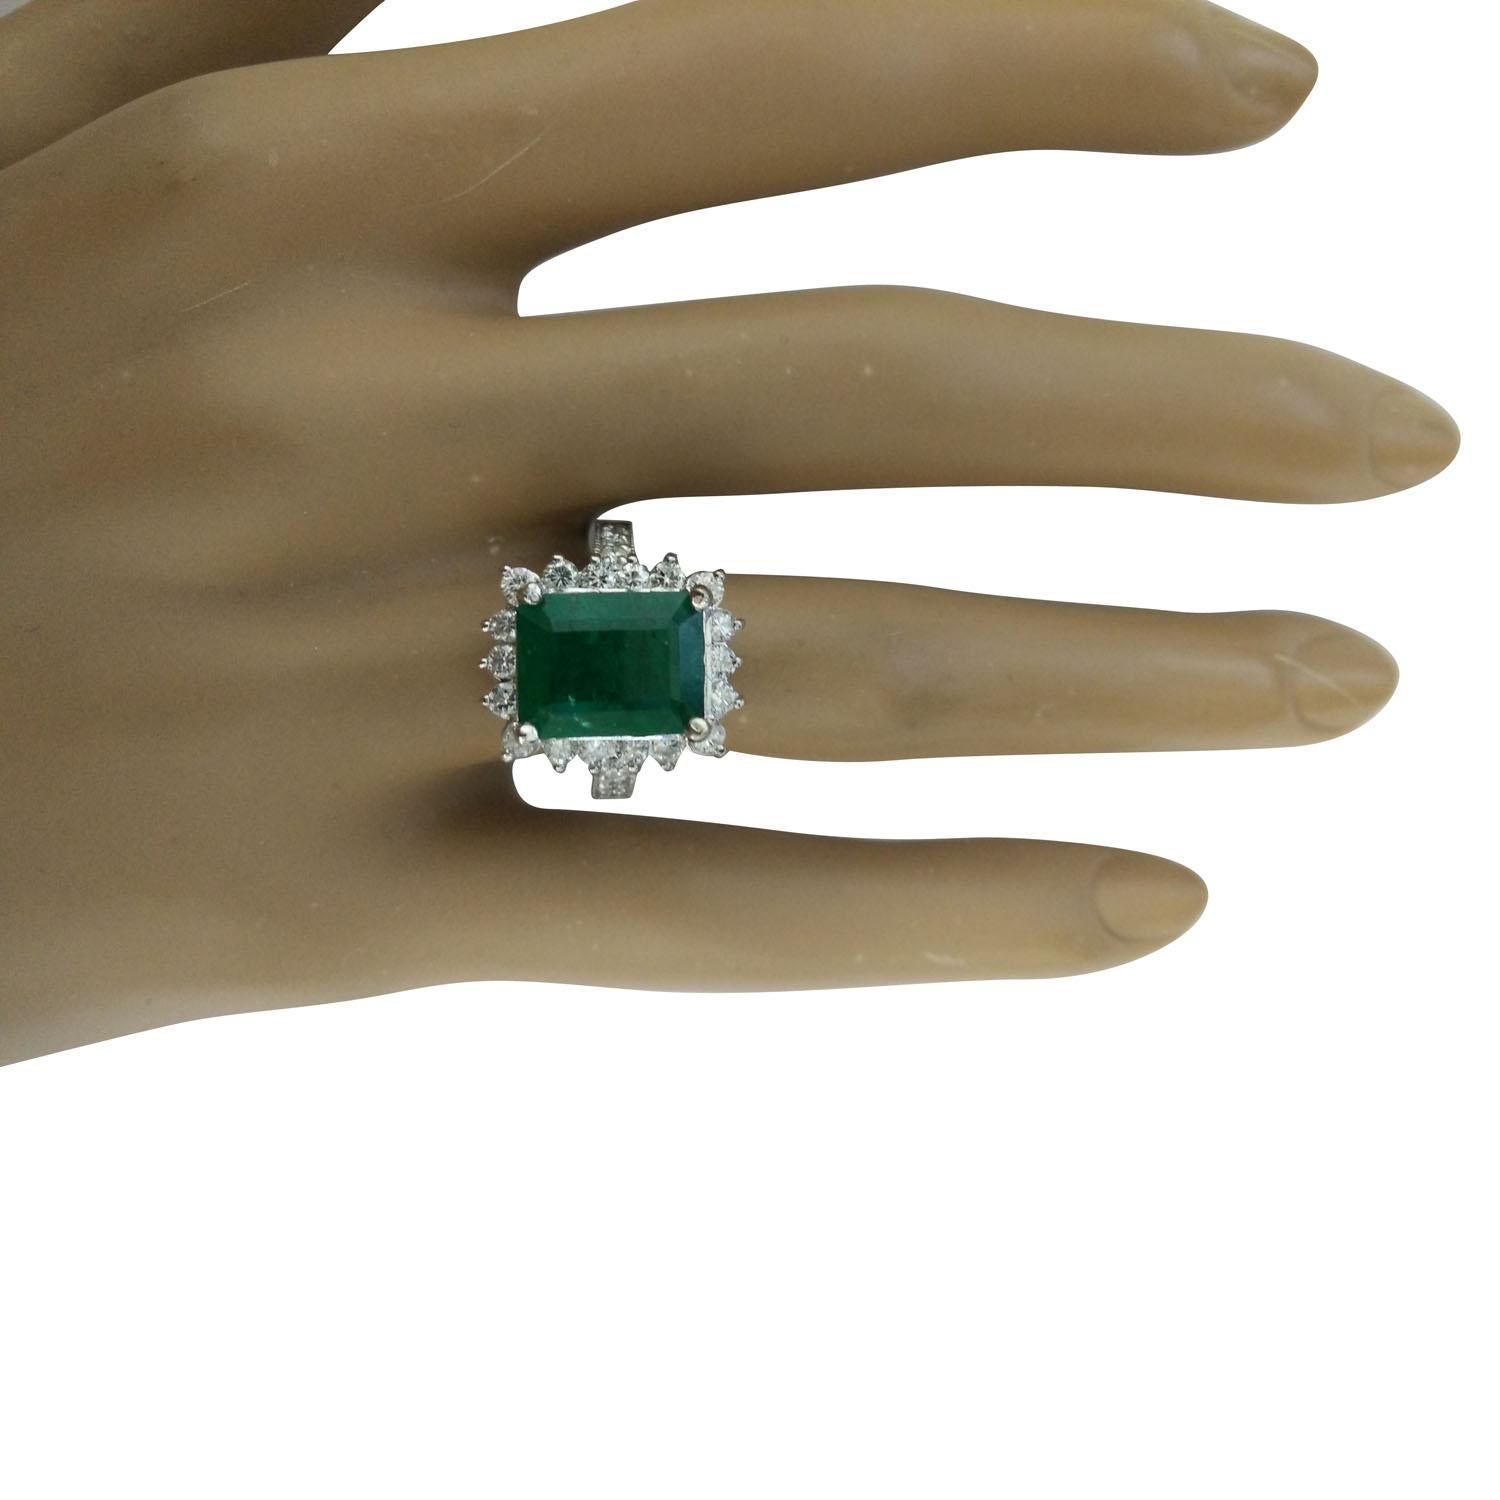 5.03 Carat Natural Emerald 14 Karat Solid White Gold Diamond Ring
Stamped: 14K
Total Ring Weight: 6.3 Grams 
Emerald Weight: 4.03 Carat (11.00x9.00 Millimeters)  
Diamond Weight: 1.00 Carat (F-G Color, VS2-SI1 Clarity)
Quantity: 26
Face Measures: